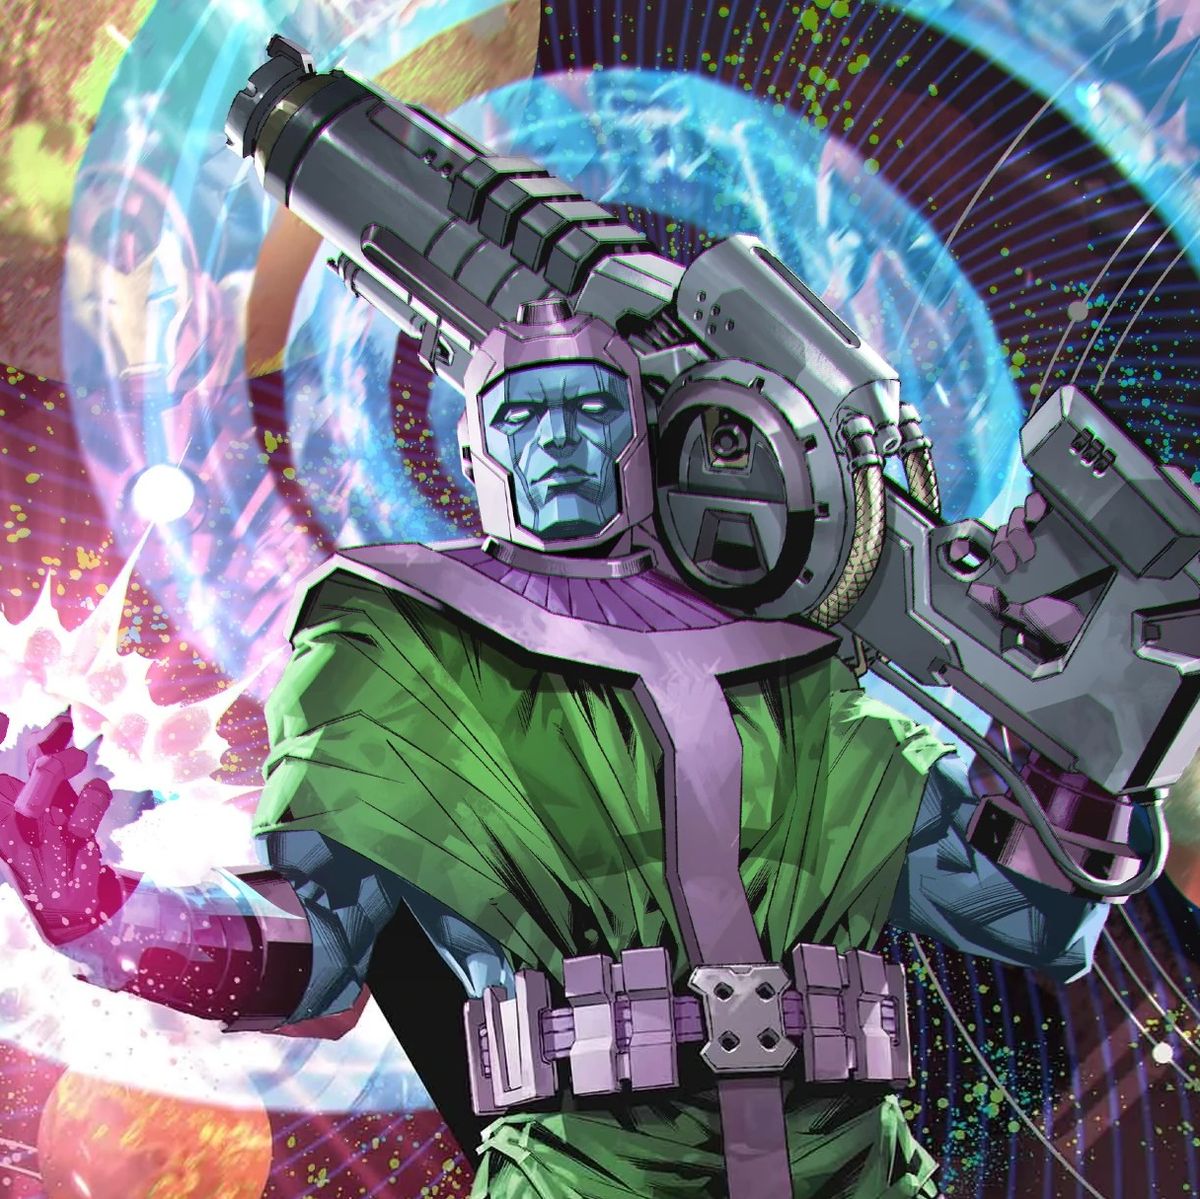 Powe of Kang the Conqueror. This time-traveling, reality-warping supervillain has been a recurring adversary of the Avengers and other Marvel heroes for decades.